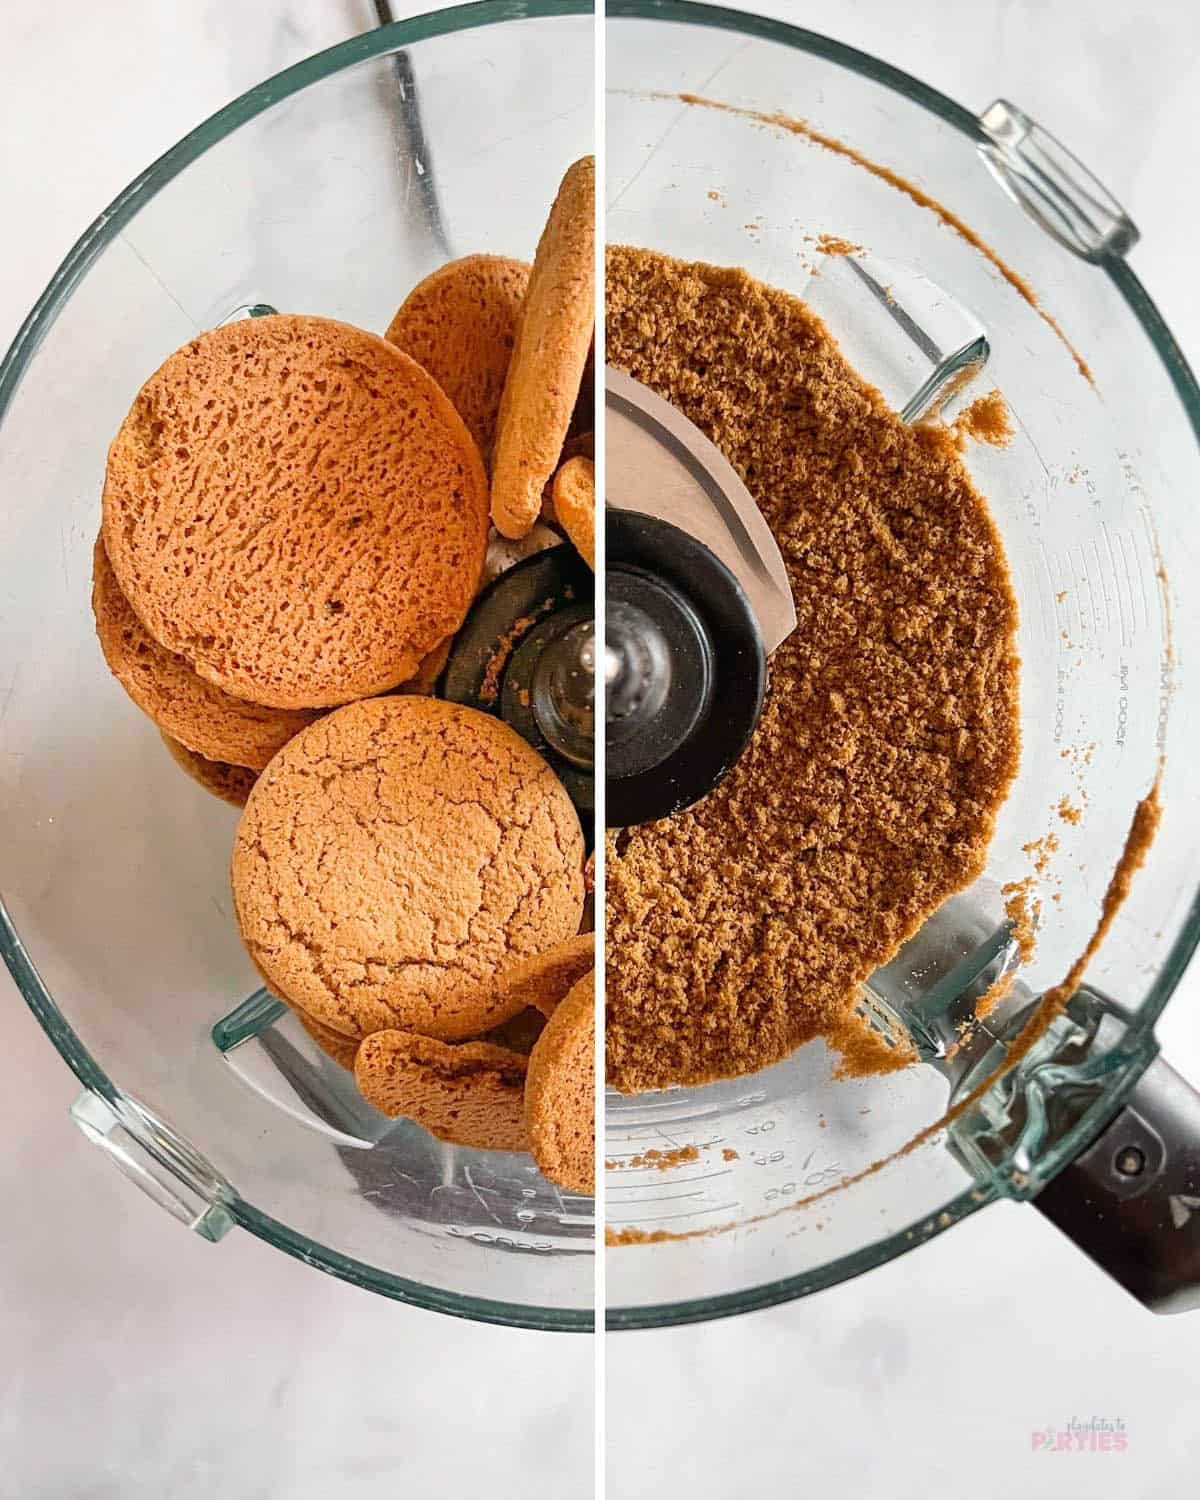 Collage showing a food processor bowl with gingersnap cookies on the left and after the cookies are ground on the right.